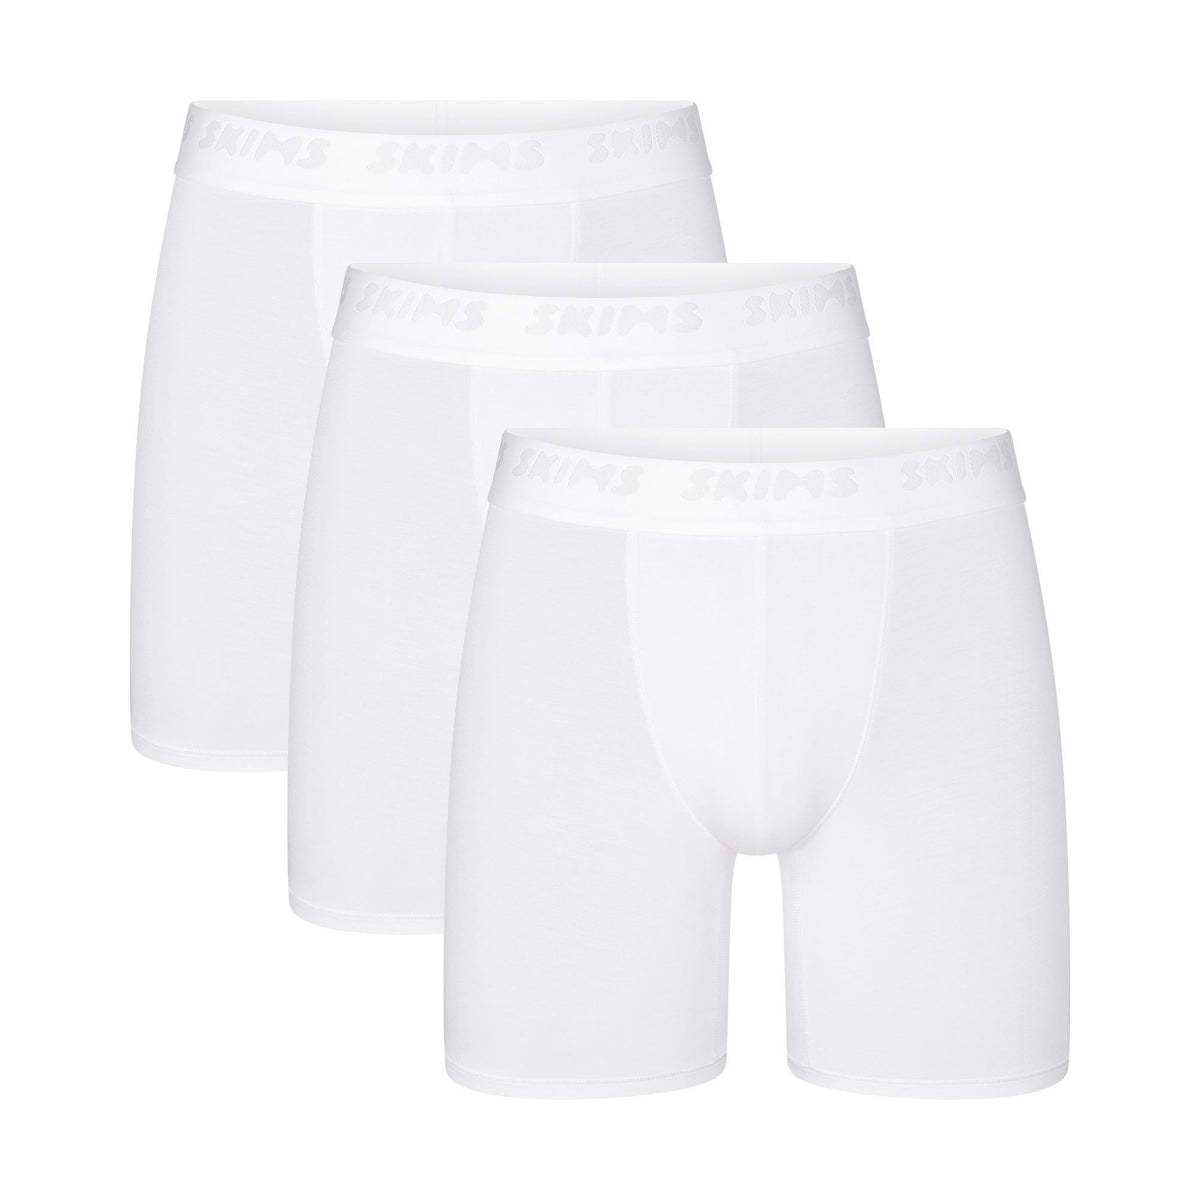 SKIMS STRETCH MENS 5″ BOXER BRIEF 3-PACK – Solutions For Every Body ...